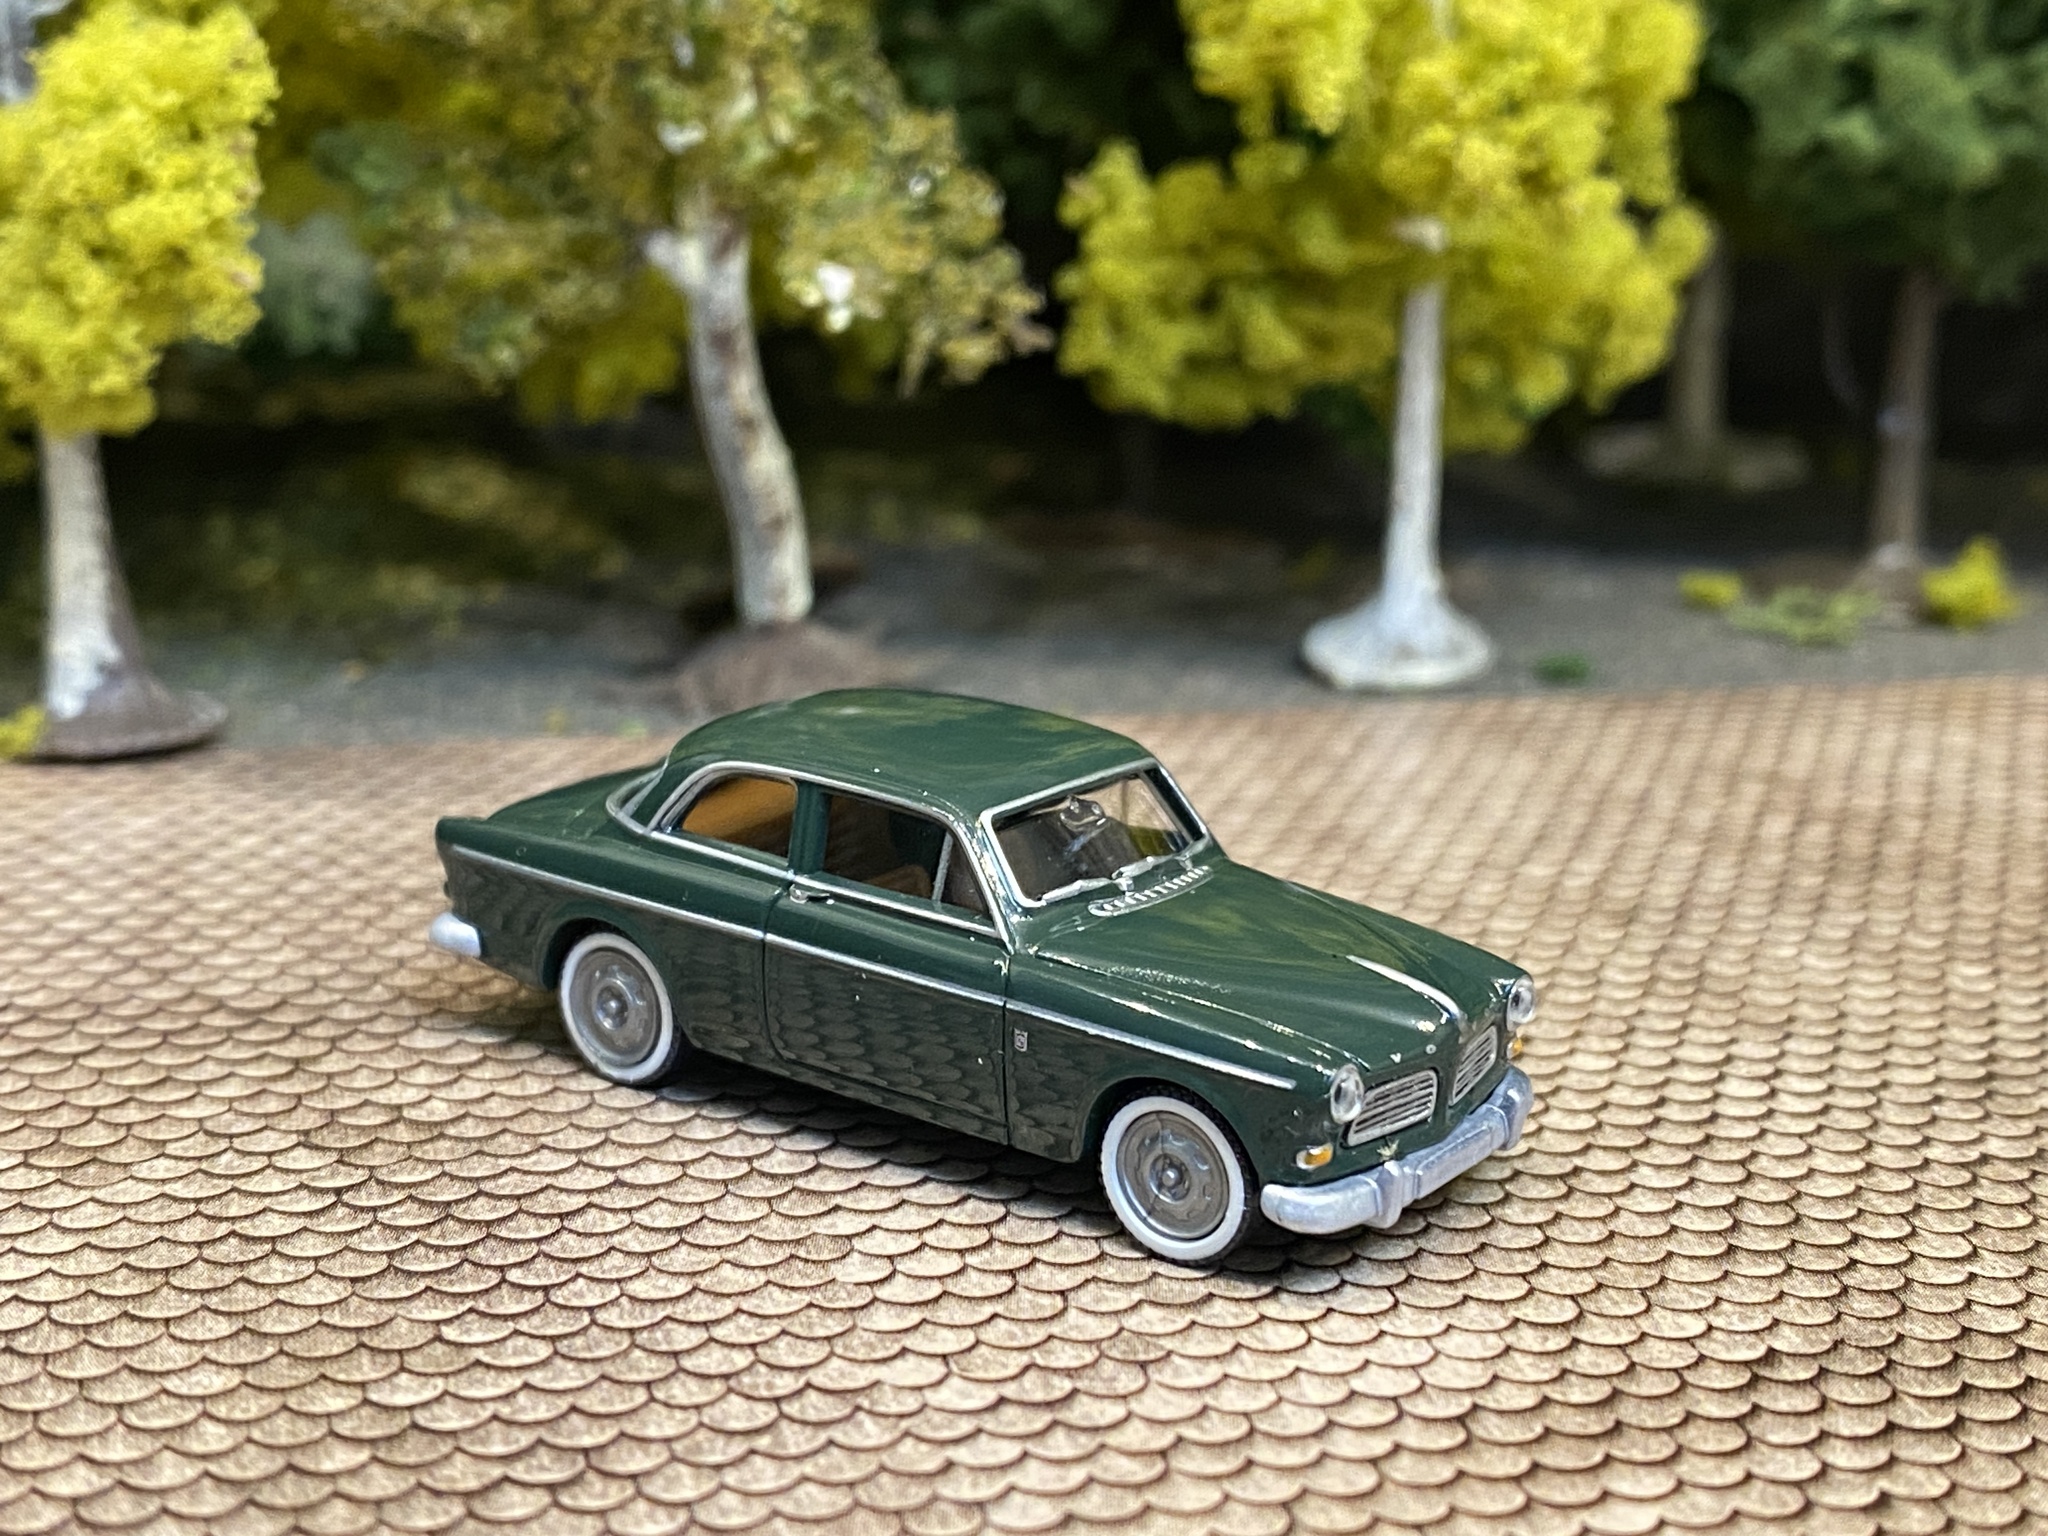 Scale 1/87 H0 - Volvo Amazon, Dark green with white wheel sides for Wiking